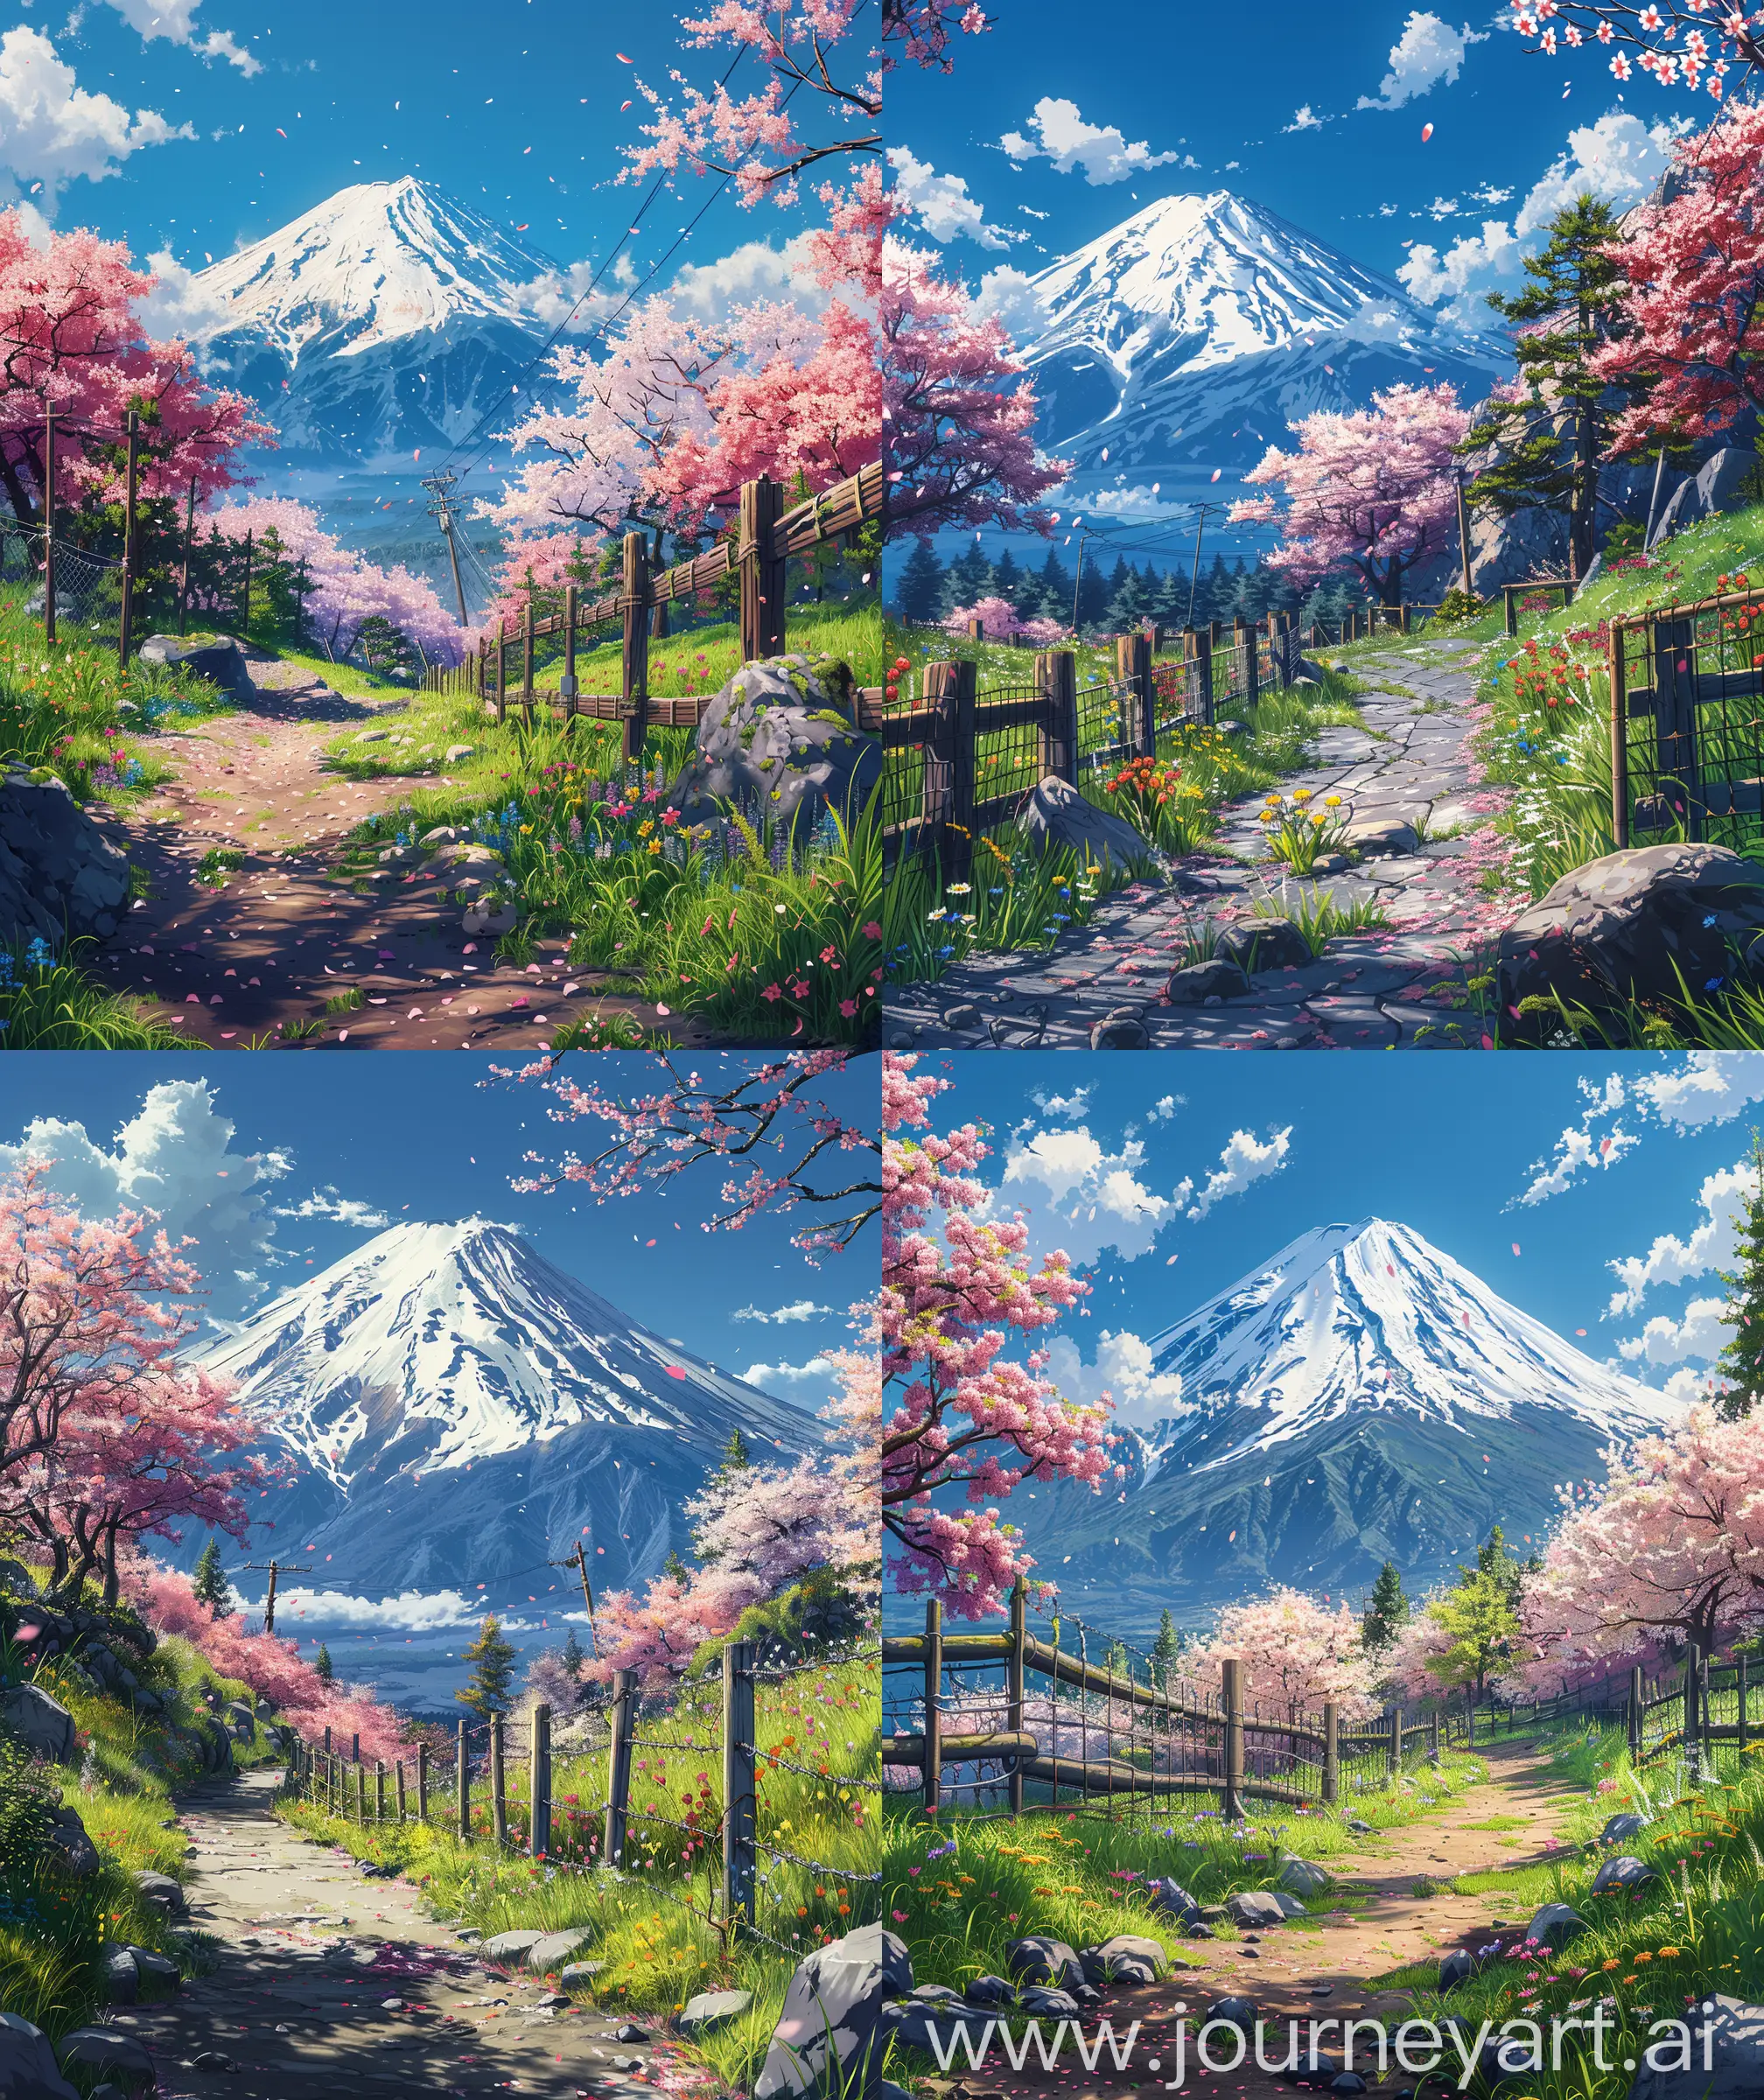 Anime scenary, illustration, mokoto shinkai and Ghibli style mix, direct front facade view of mt fuji , cherry blossom, fence, grass, rock, beautiful road, colorful wild flowers, day time, spring , blue sky, ultra HD, high quality, sharp details, anime style, no hyperrealistic --ar 27:32 --s 400